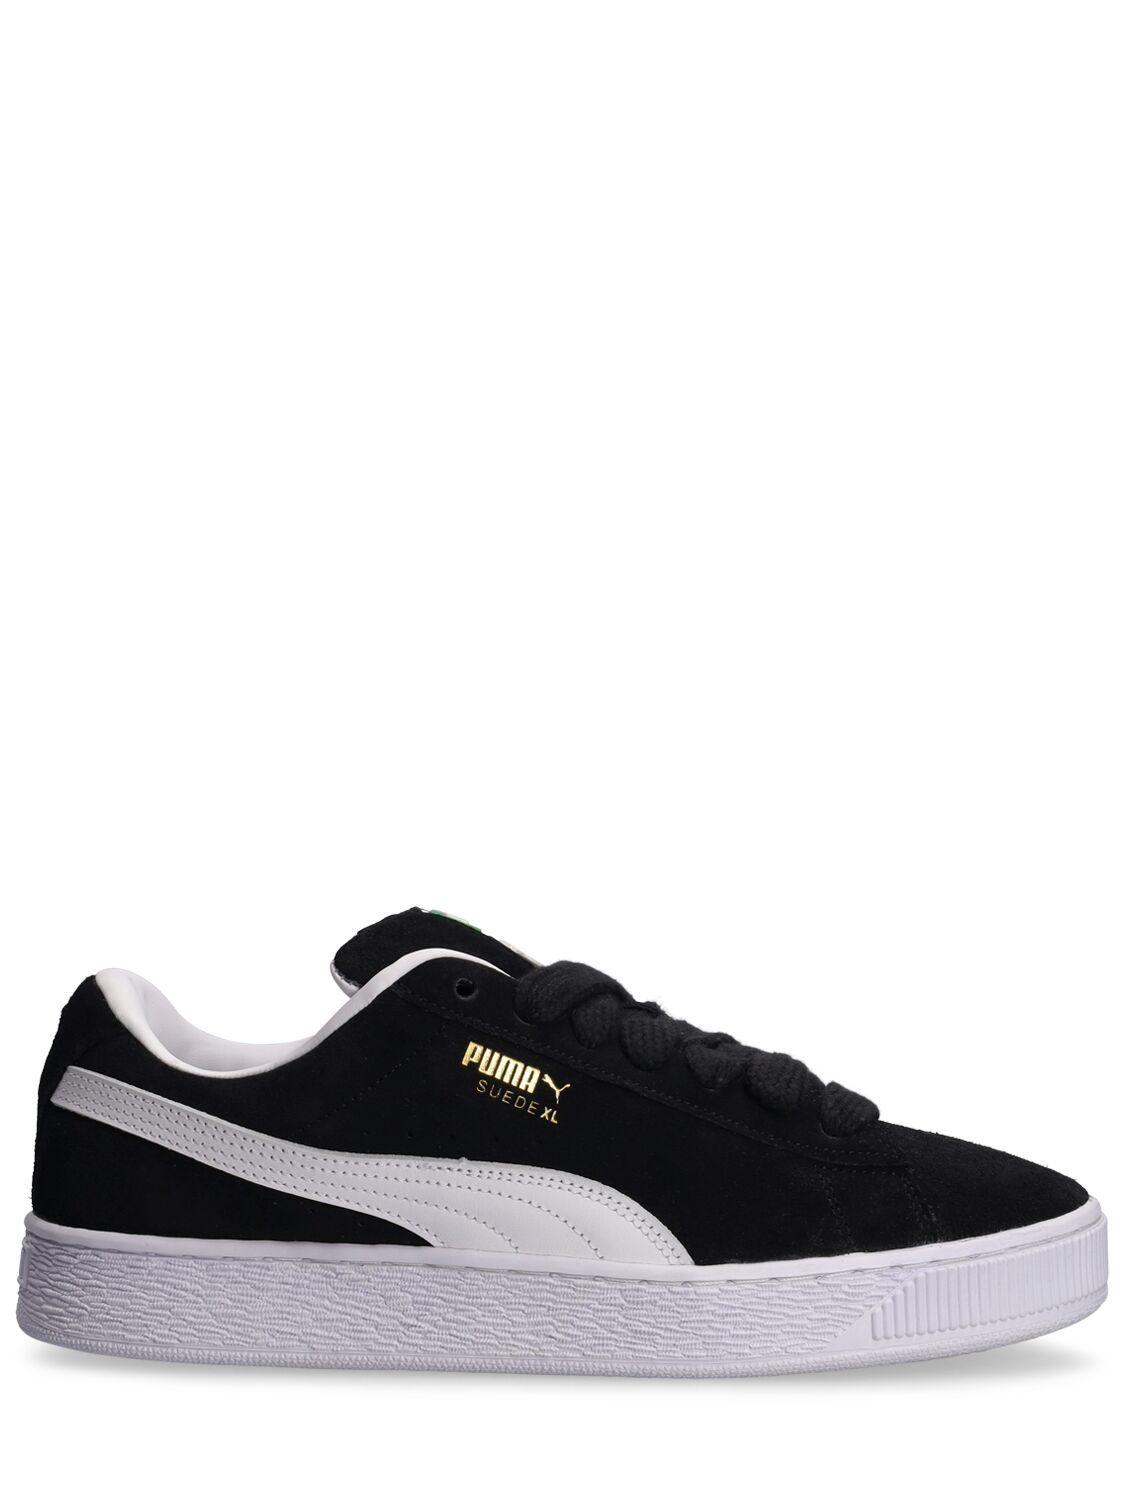 PUMA Suede Xl Sneakers in Black for Men | Lyst